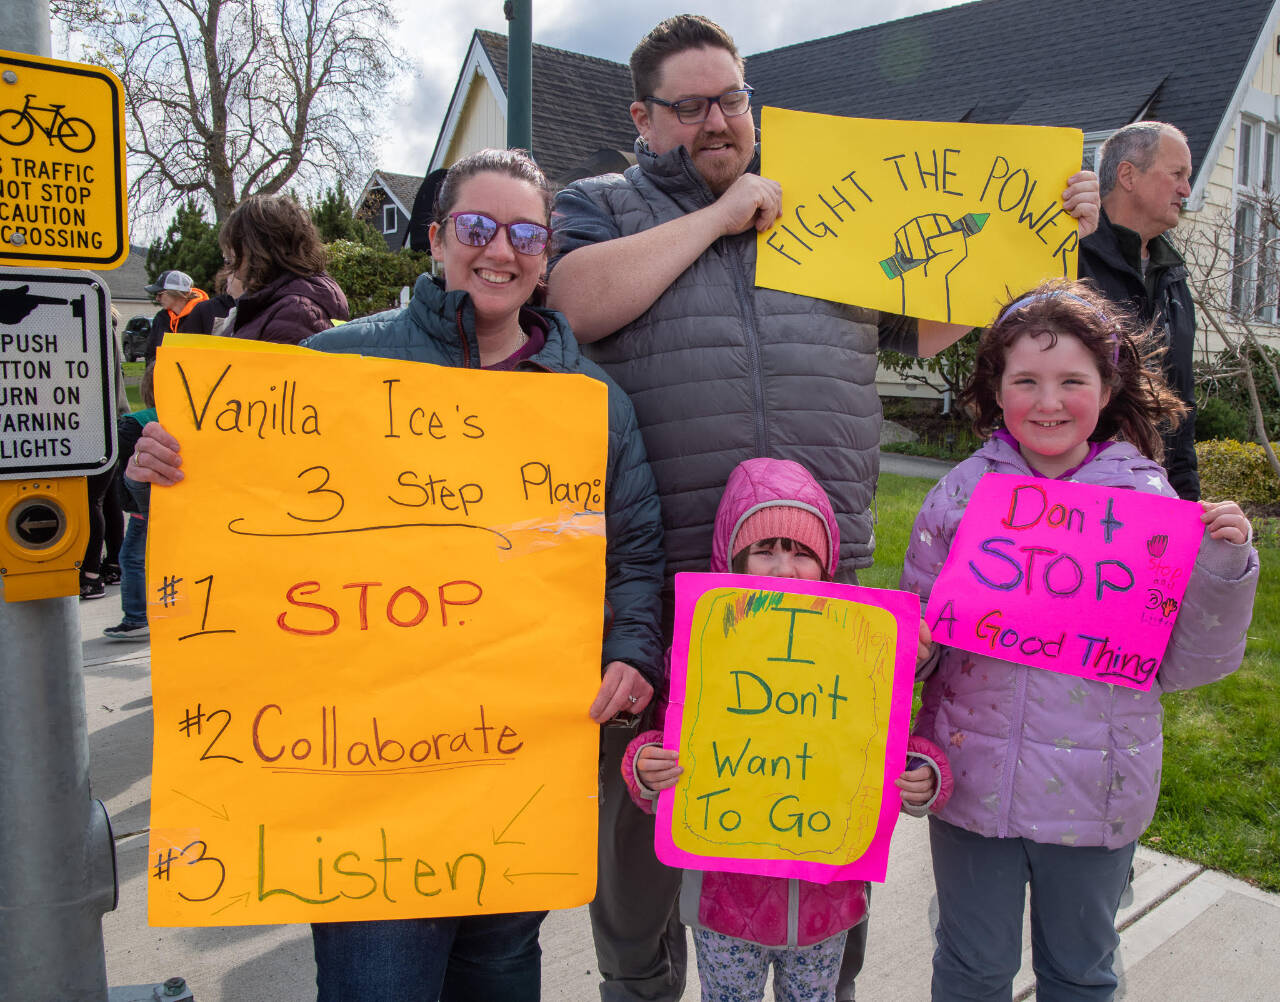 Sequim Gazette photo by Emily Matthiessen
Wynn and Jared Hannam, joined here by youngsters Nora (center) and Ellie, protest on April 17 the reconfiguration of Sequim’s elementary schools.